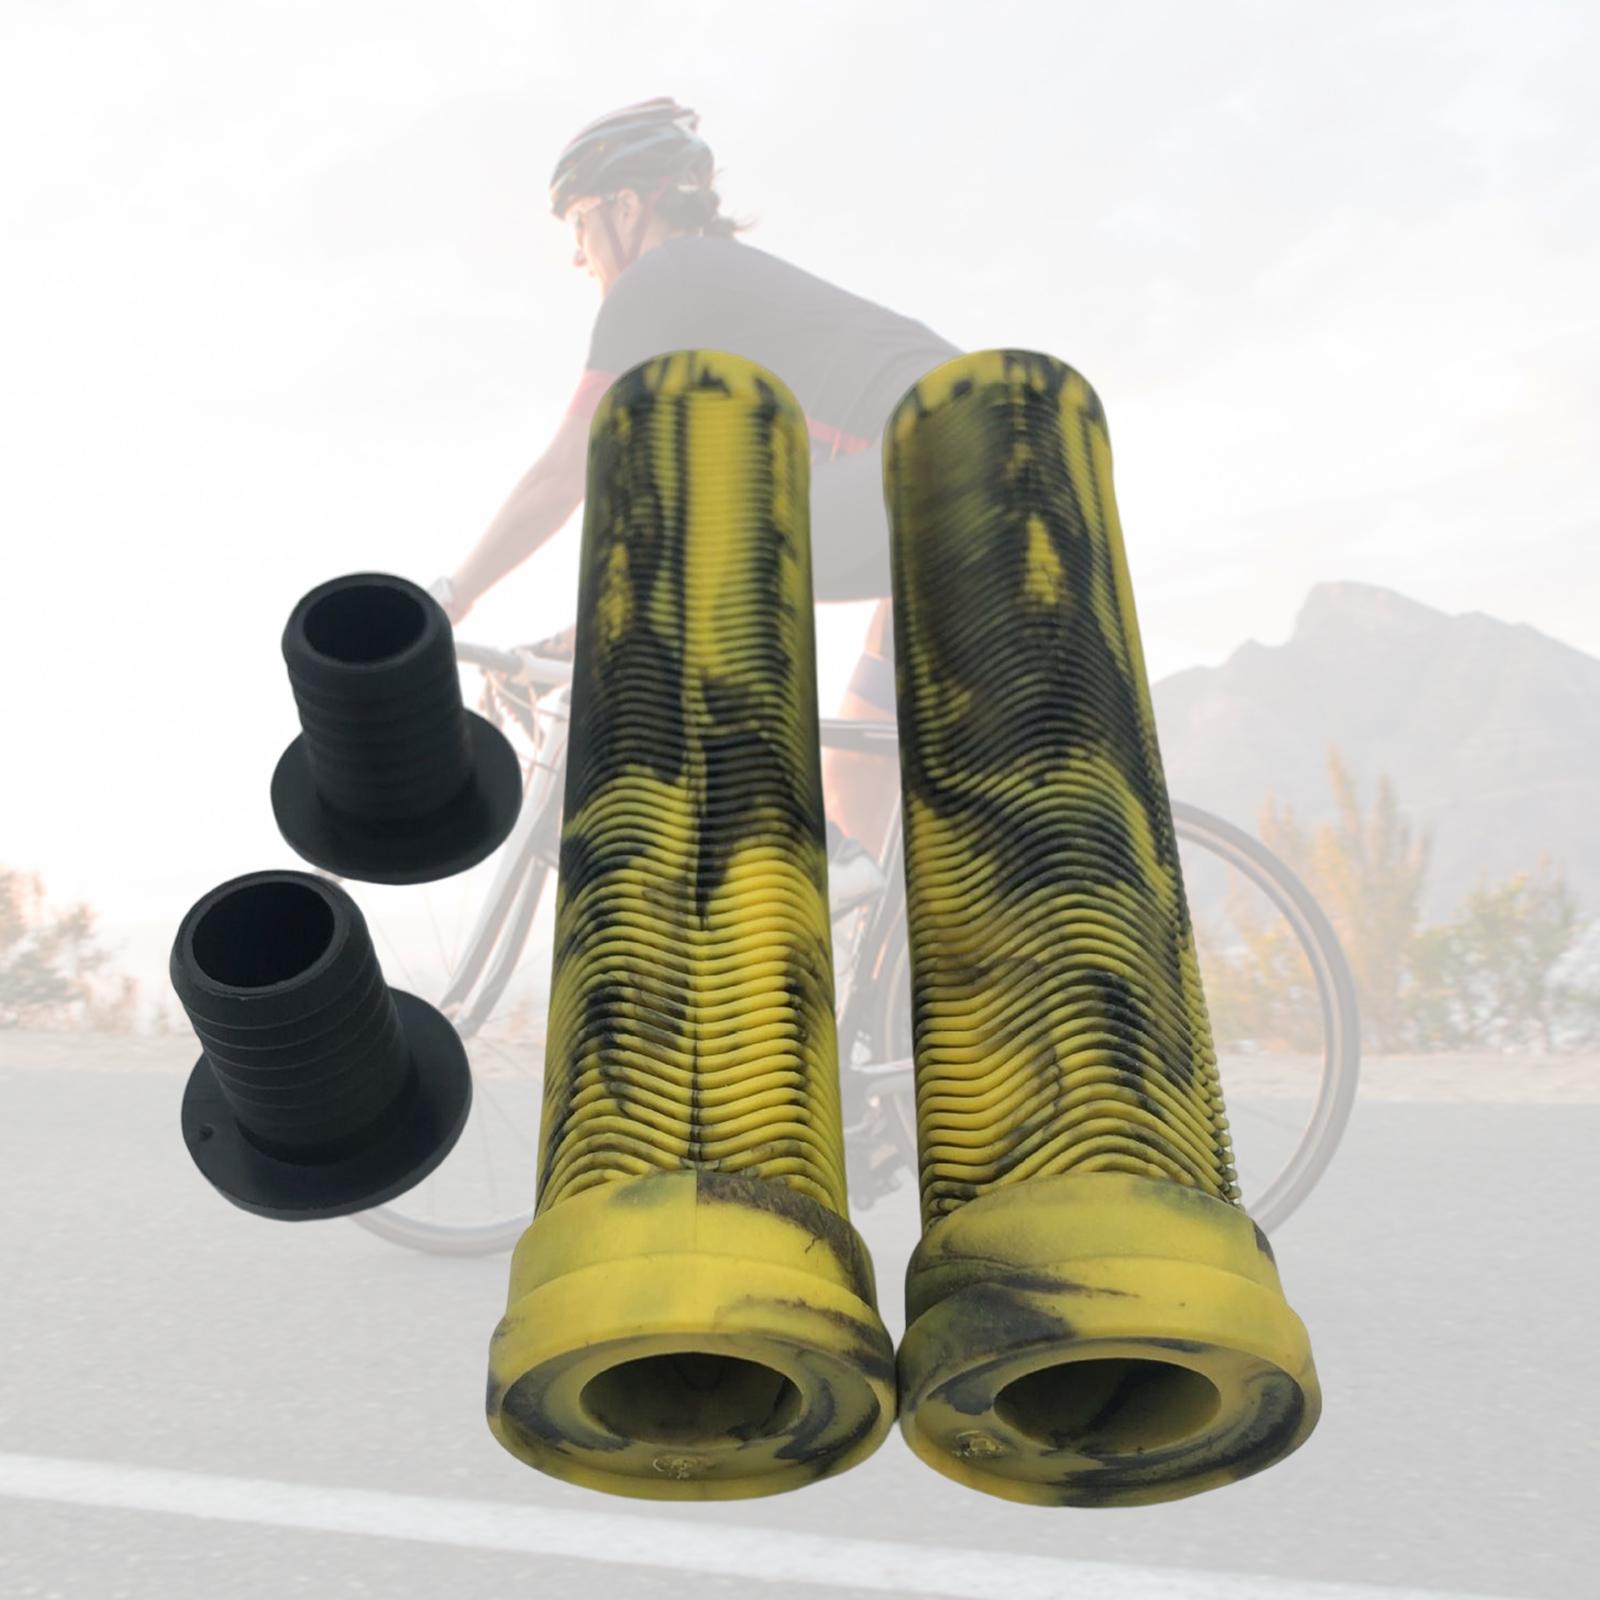 2x Soft Handlebar Grips Sleeve Anti-Skid Comfortable for BMX Sports Cycling Yellow